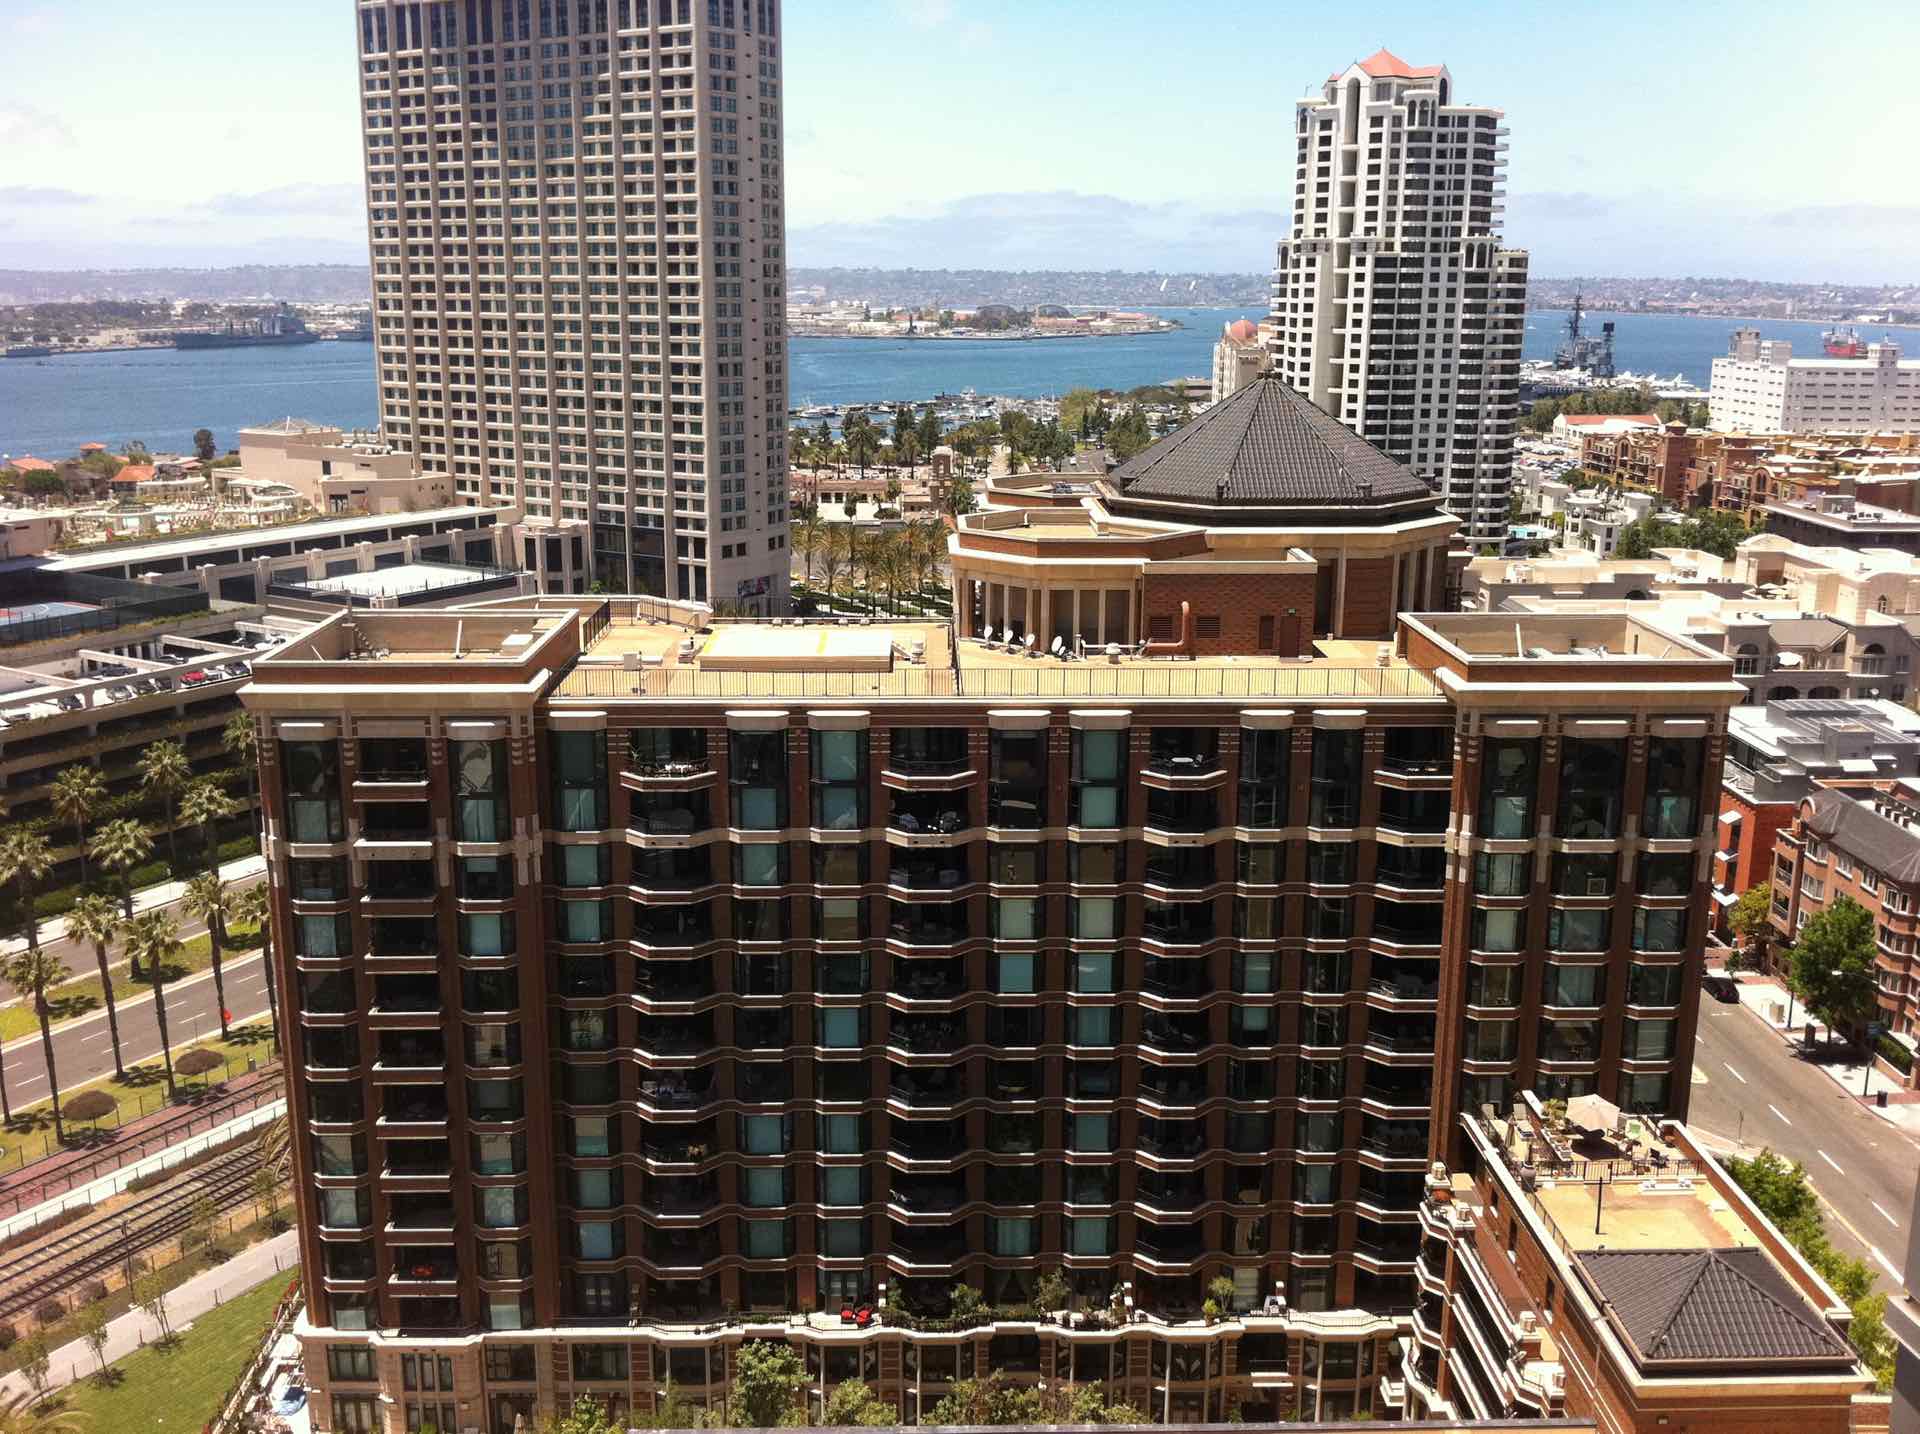 Cityfront Terrace building located at 500 West Harbor Drive in San Diego